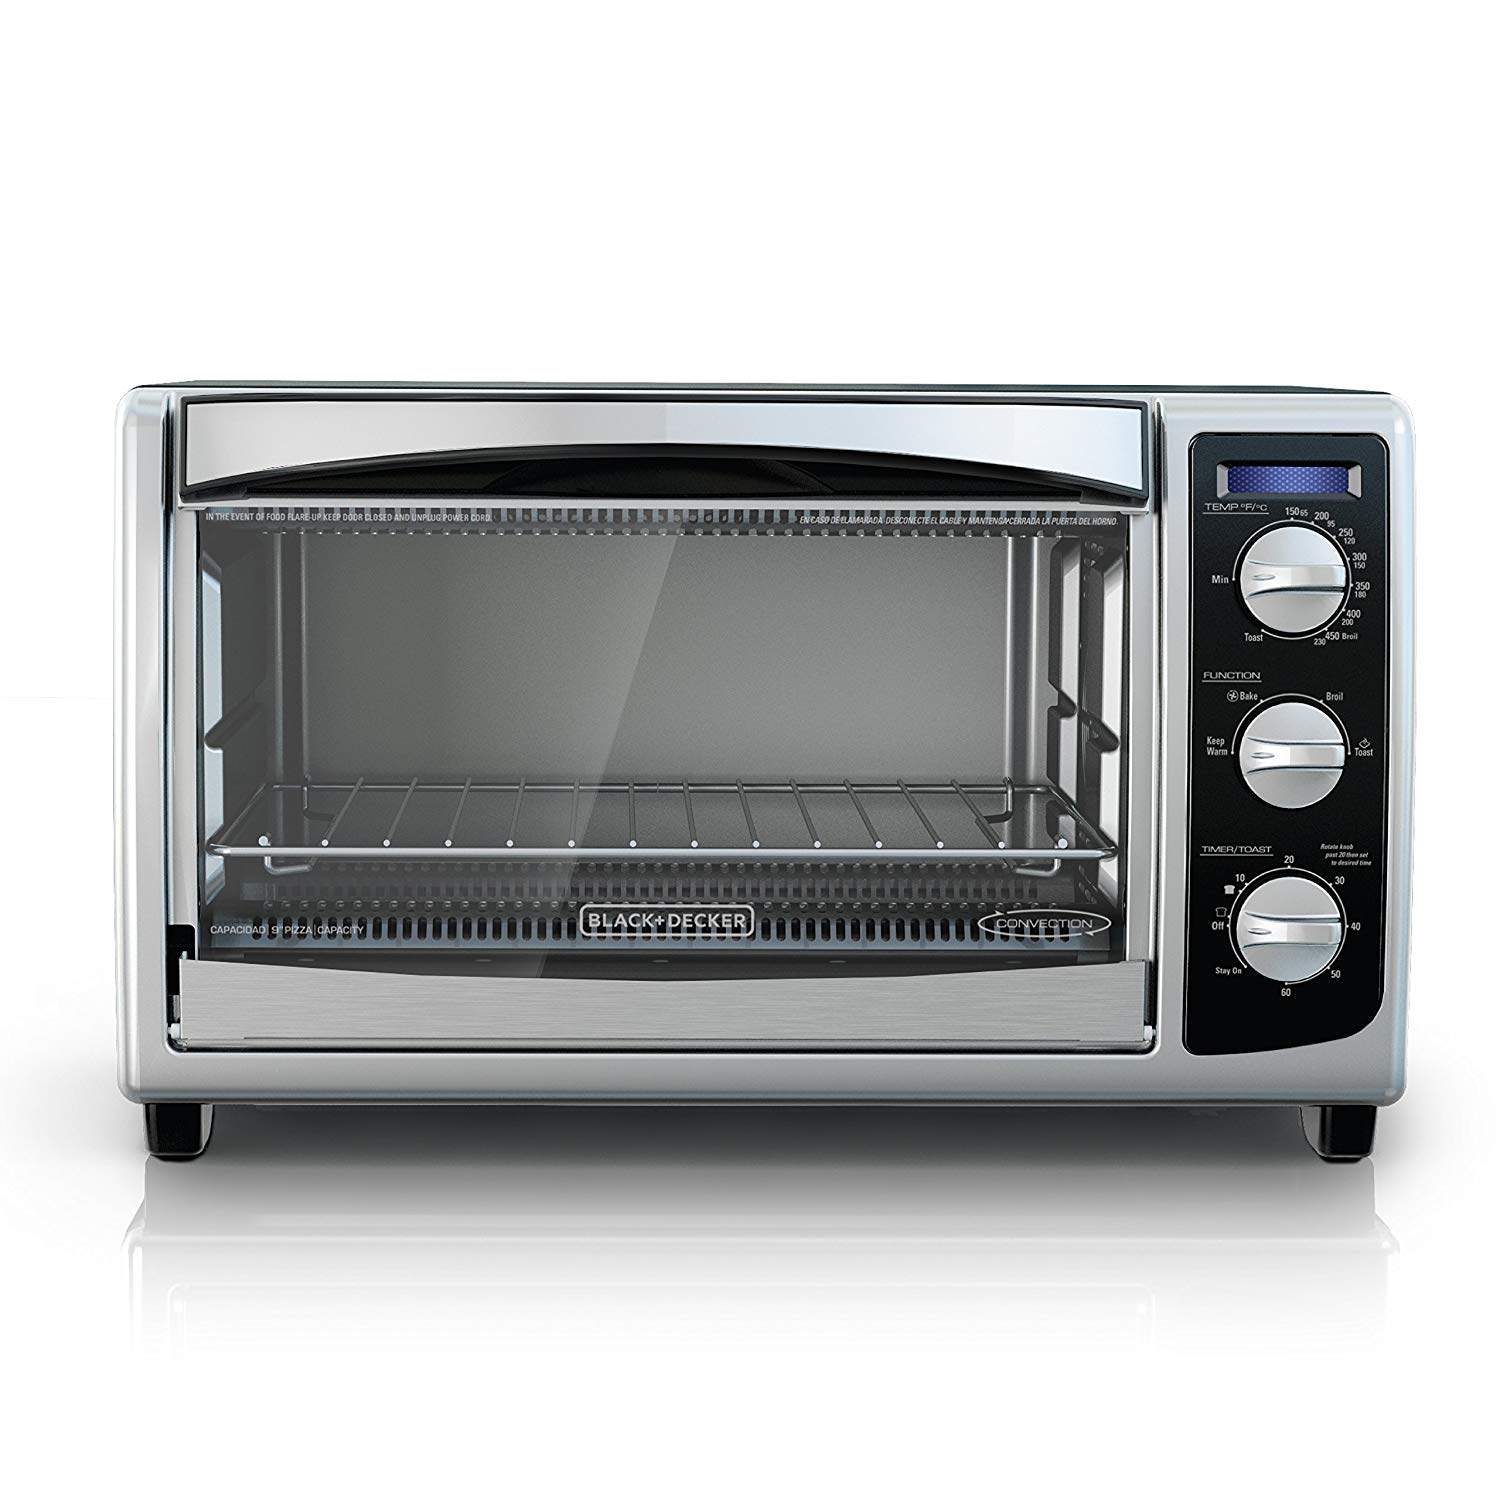 Countertop Large Toaster Oven Fits 6 Slices of Toast/13 Pizza - for Toast,  Broil, Bake, Keep Warm, Convection (45Qt) 